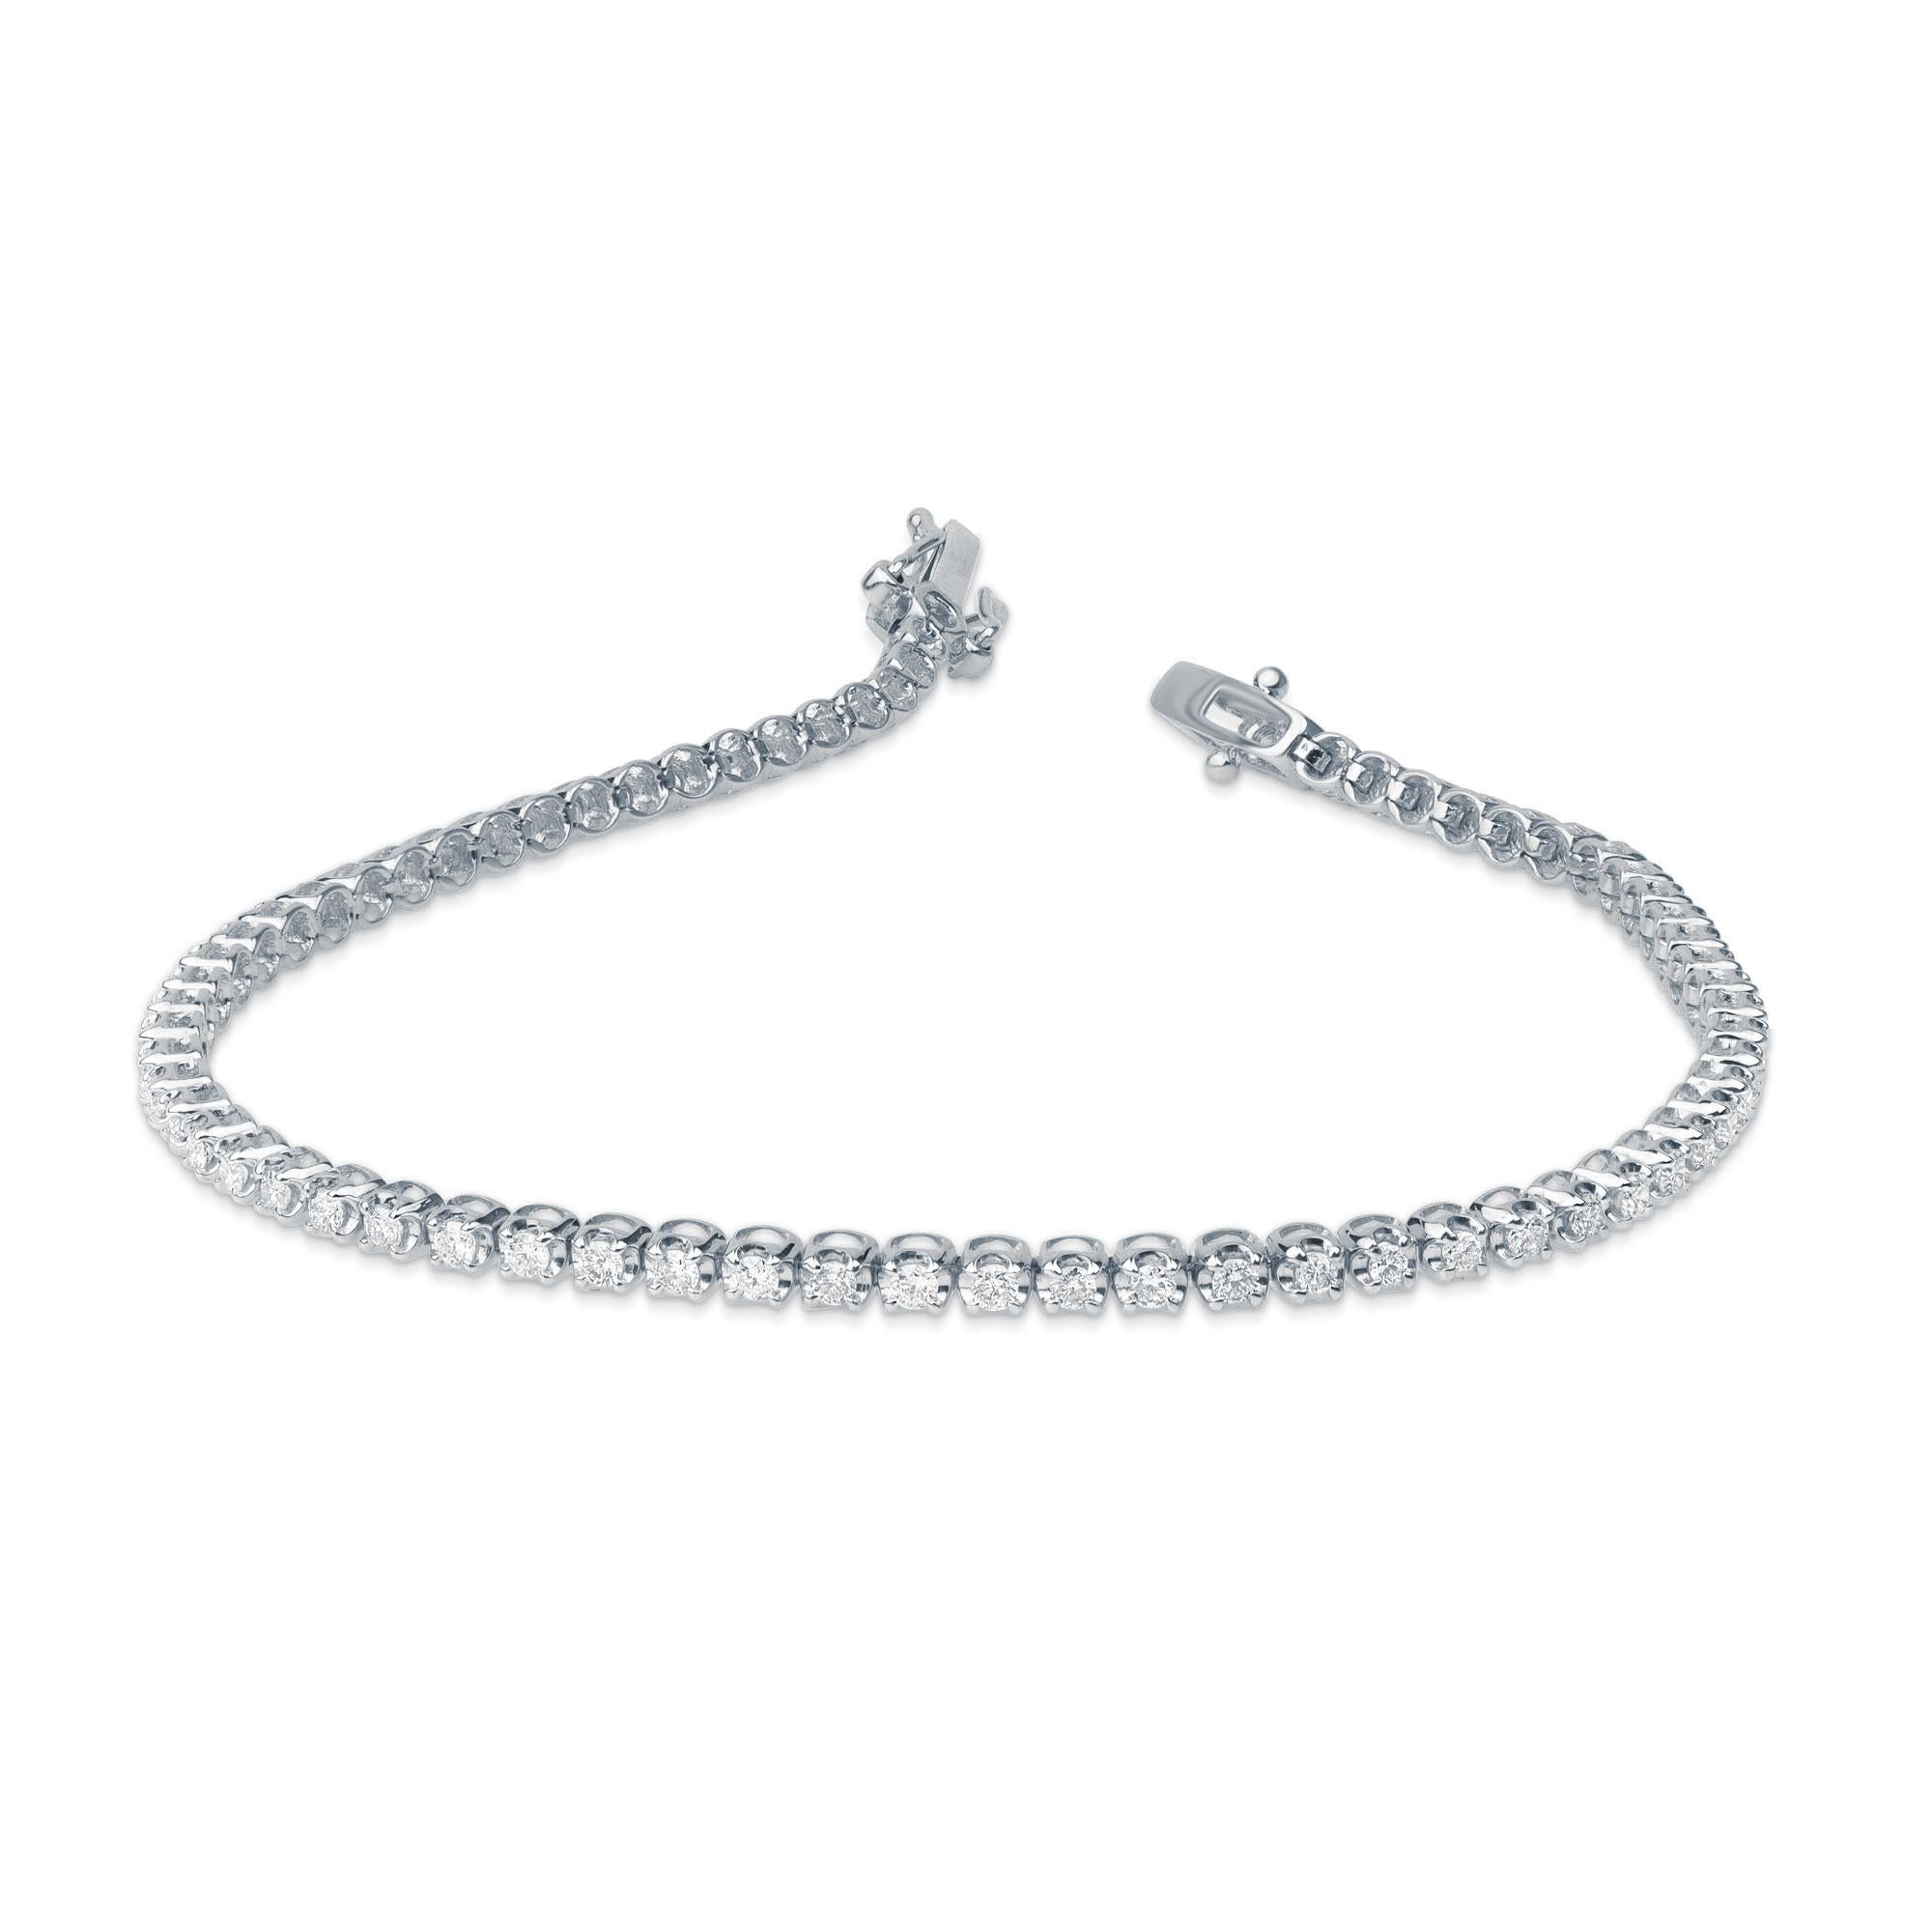 A classic tennis bracelet – perfect accessory for women with everyday attire. Elegantly designed in 10 kt white gold and embellished with 55 brilliant natural diamonds in prong setting. Diamonds are graded H-I Color, I2 Clarity.